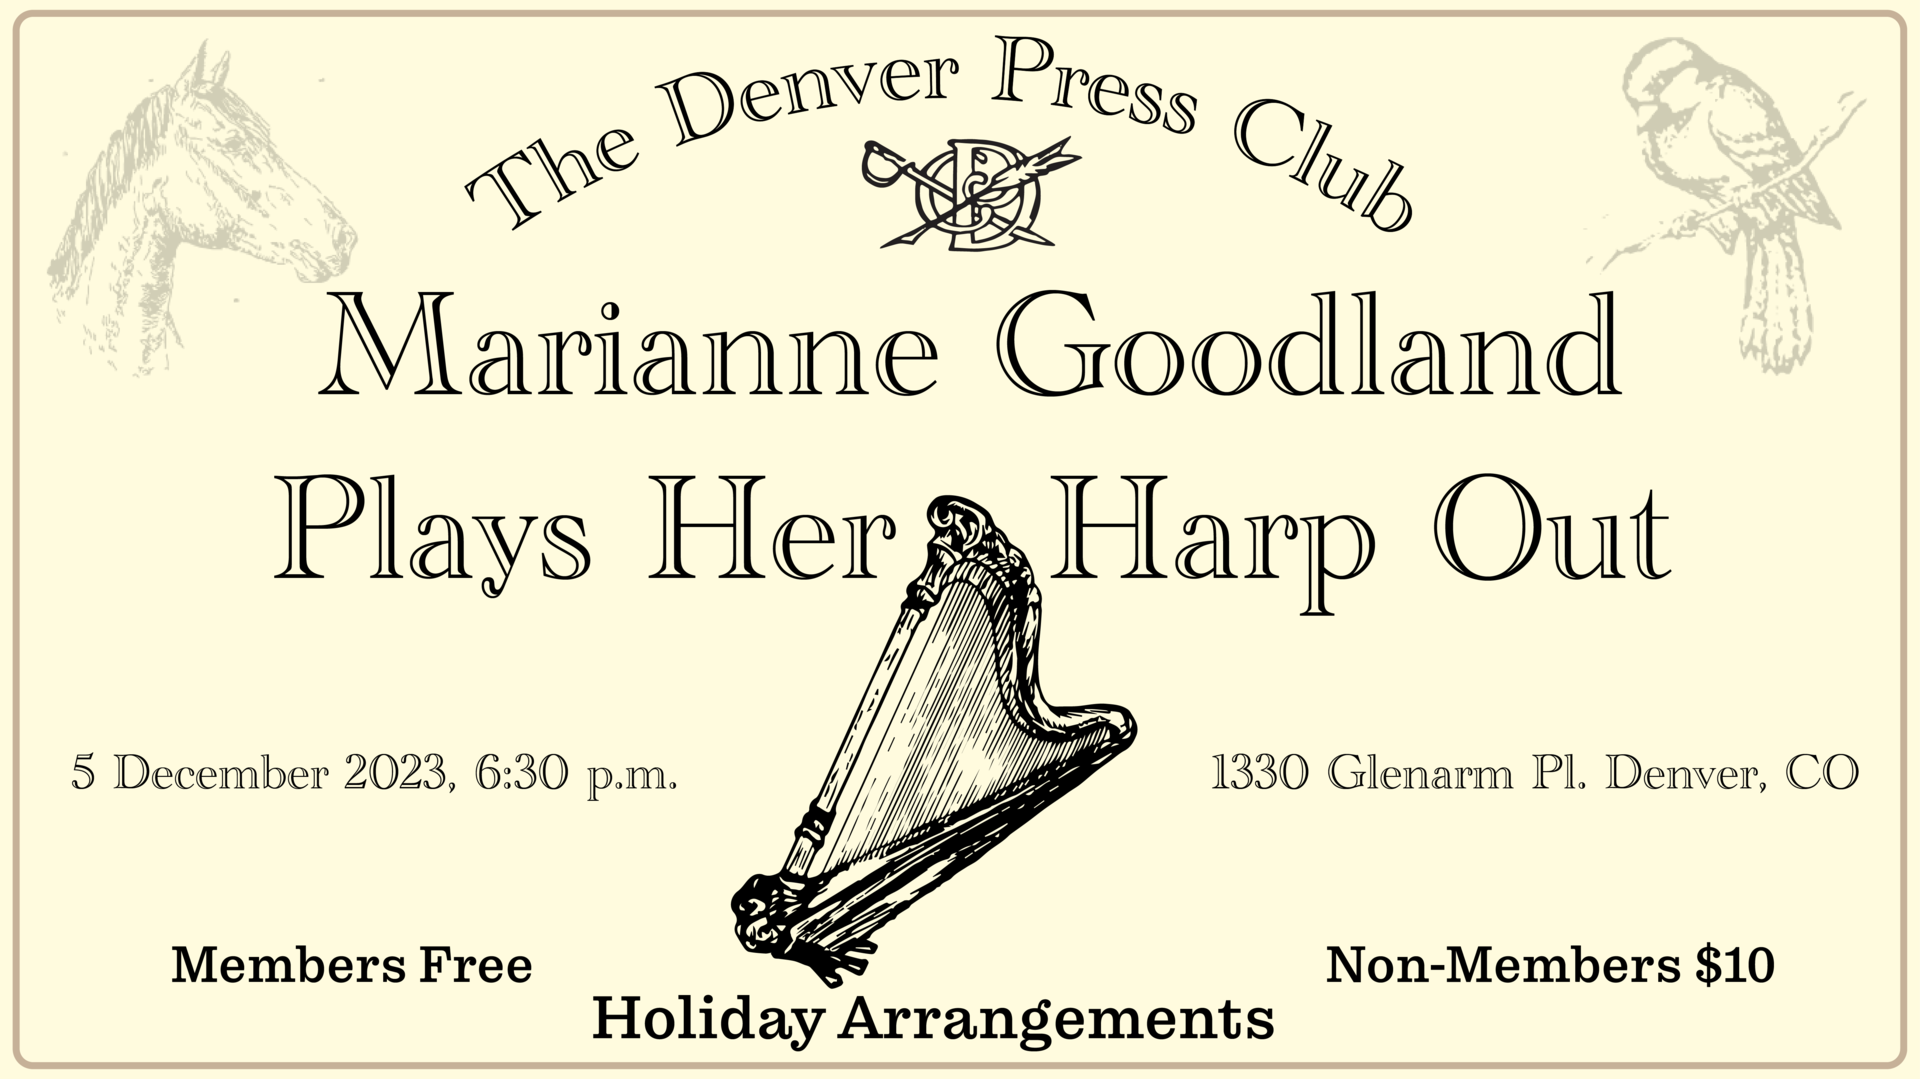  The Denver Press Club presents: Marianne Goodland Plays Her Harp Out